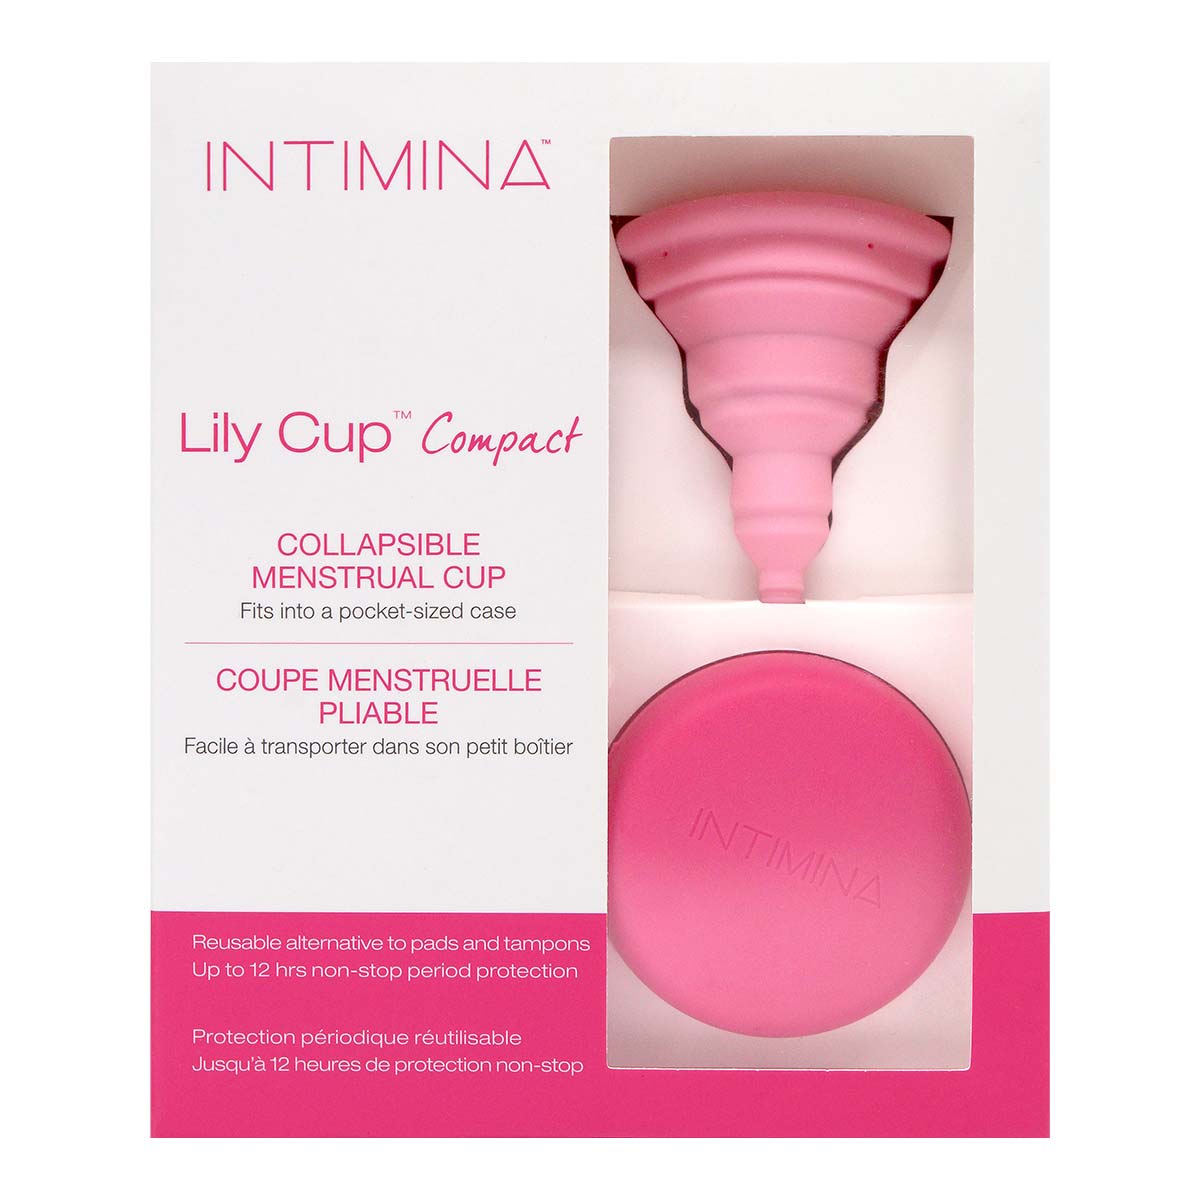 Intimina Lily Cup Compact 摺疊式月經杯 (Size A)-p_2